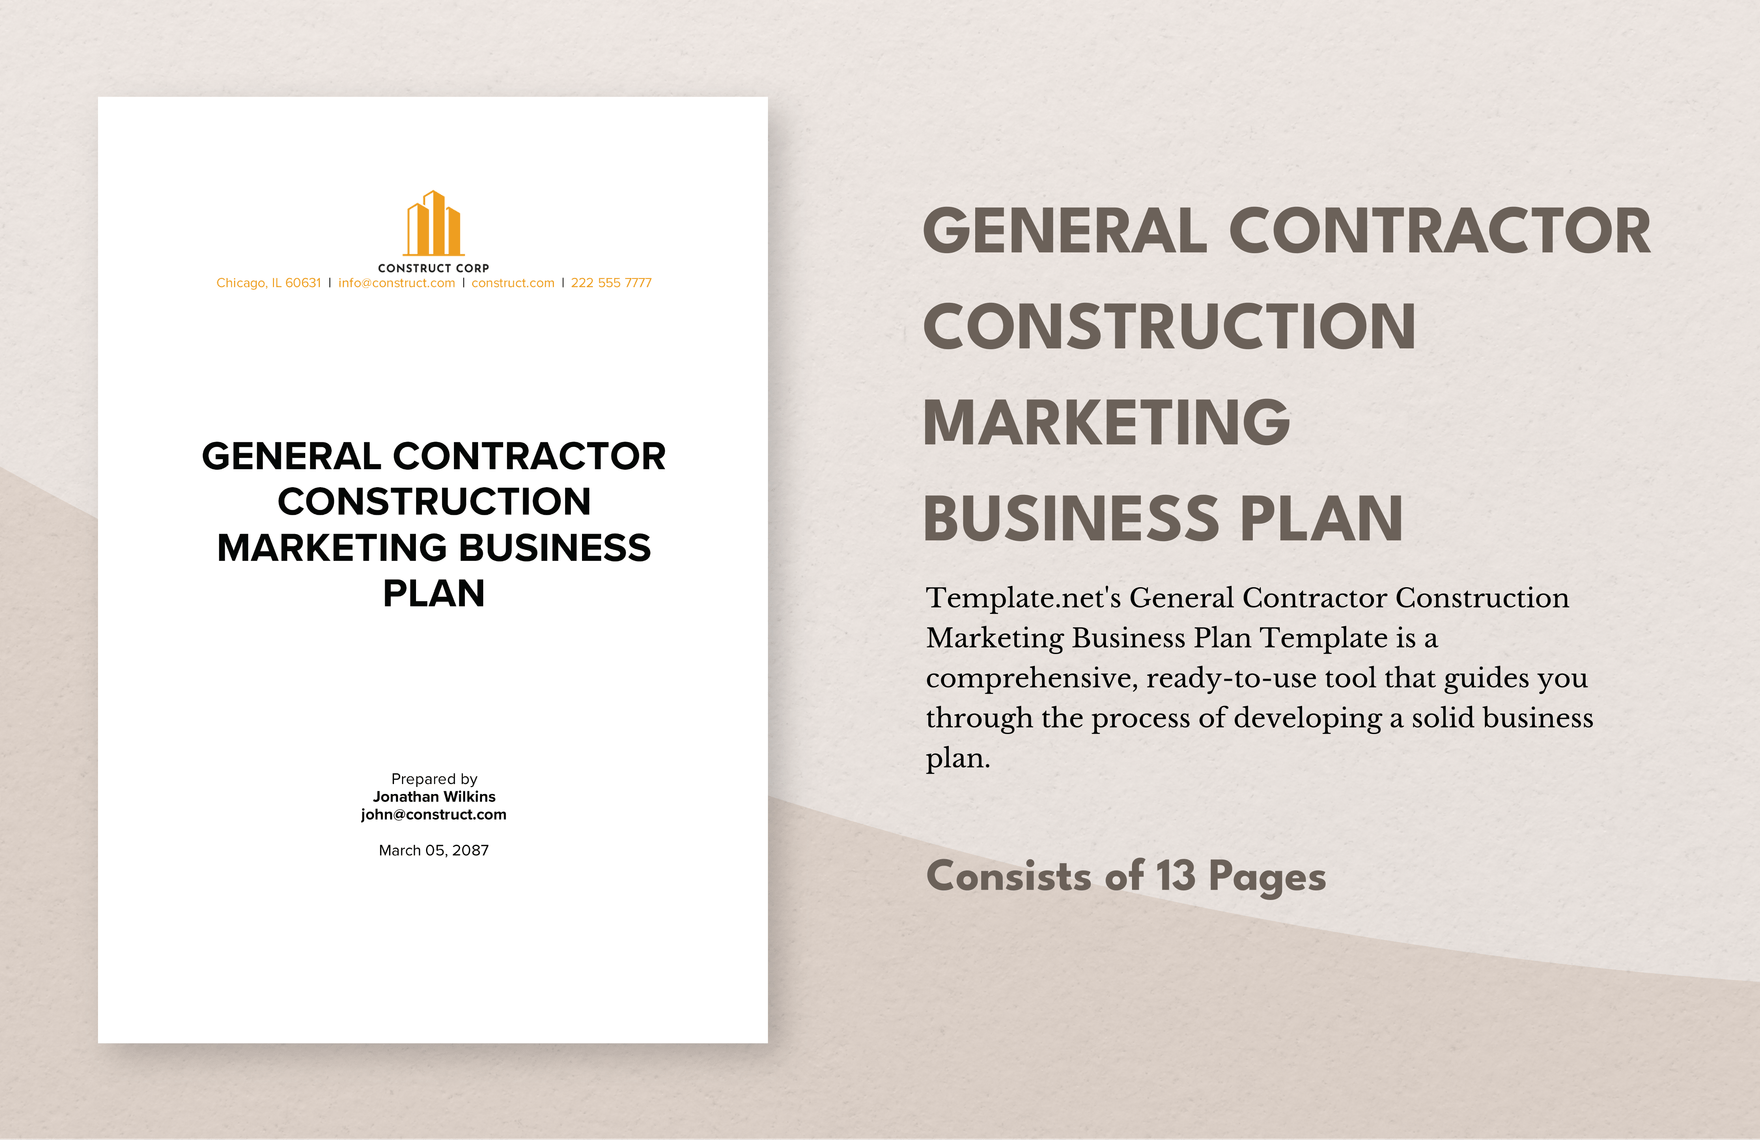 General Contractor Construction Marketing Business Plan Template